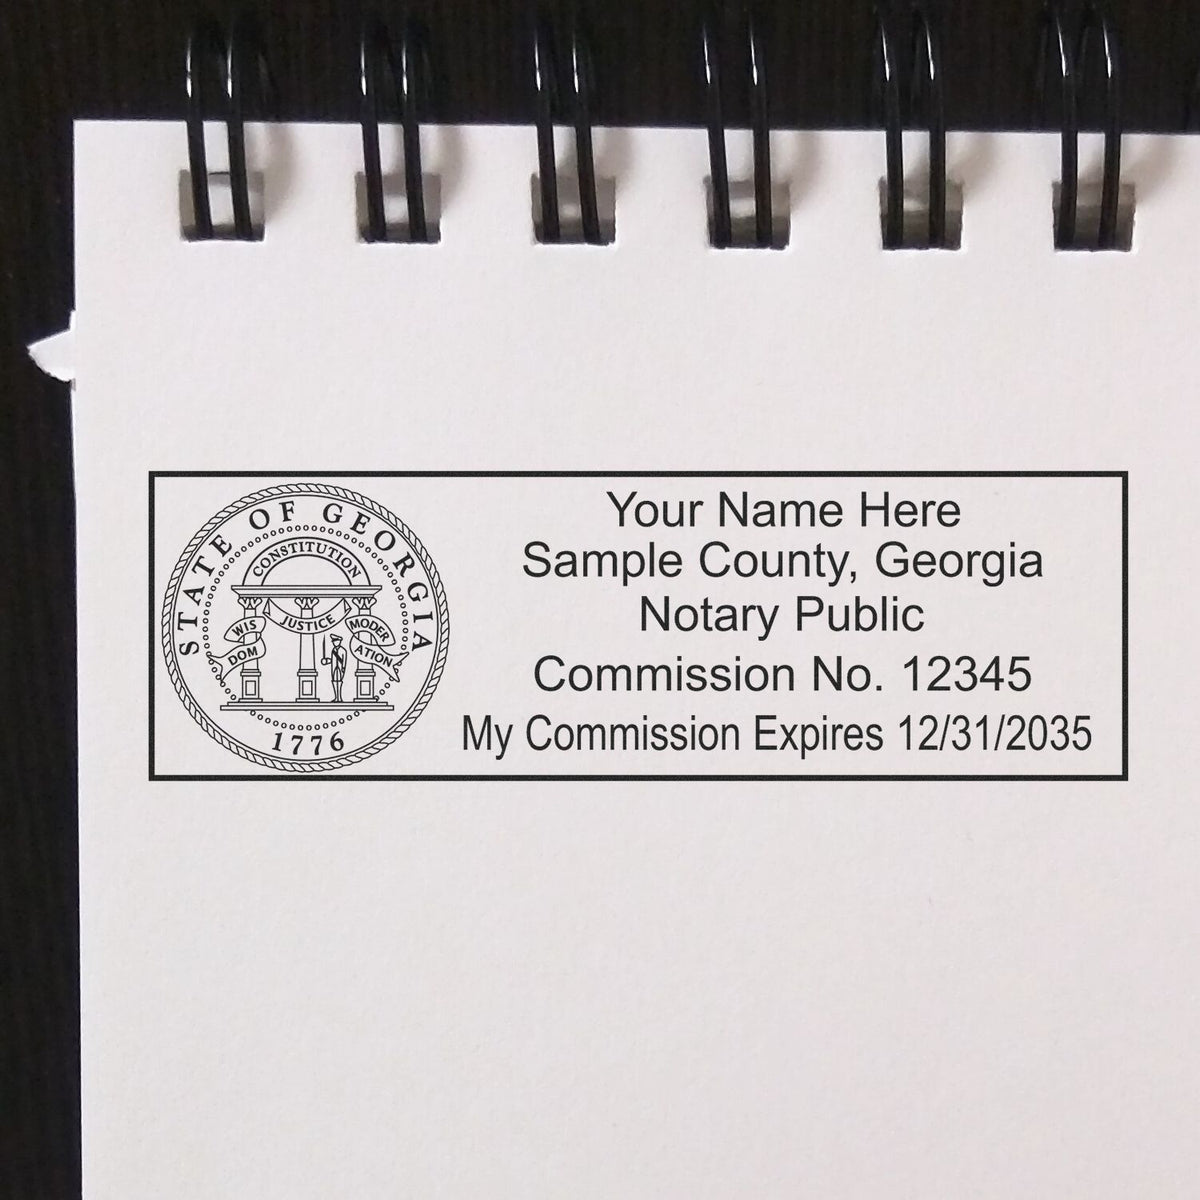 The Slim Pre-Inked Rectangular Notary Stamp for Georgia stamp impression comes to life with a crisp, detailed photo on paper - showcasing true professional quality.